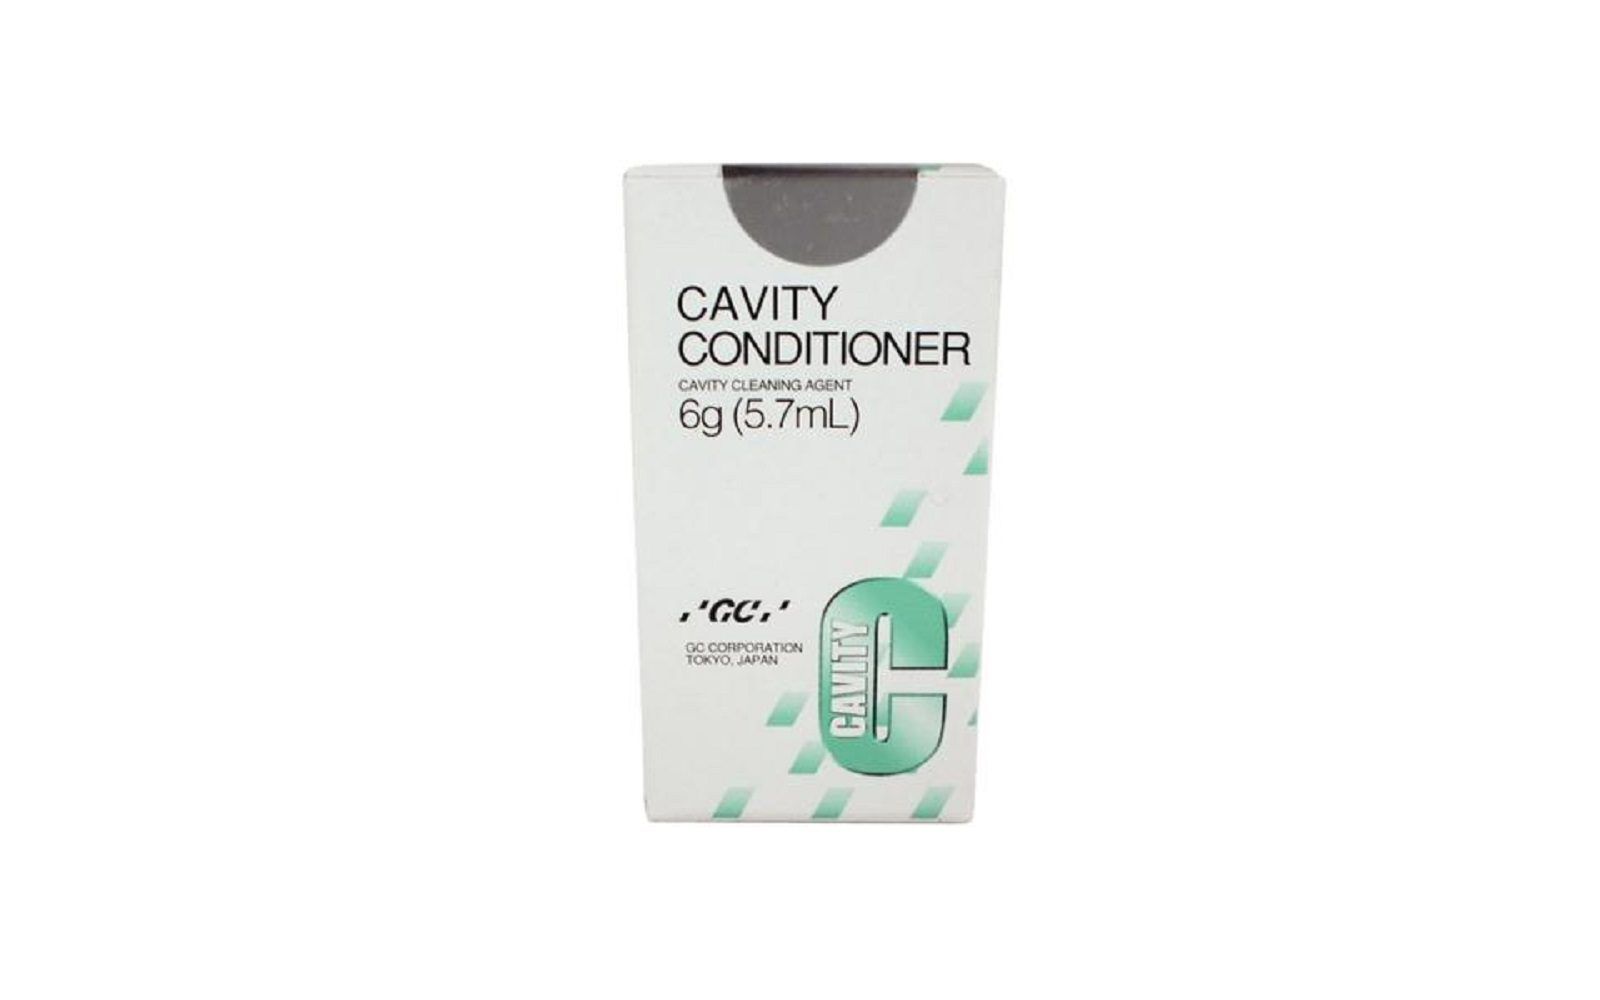 Cavity conditioner cavity cleaning agent – 6 g bottle